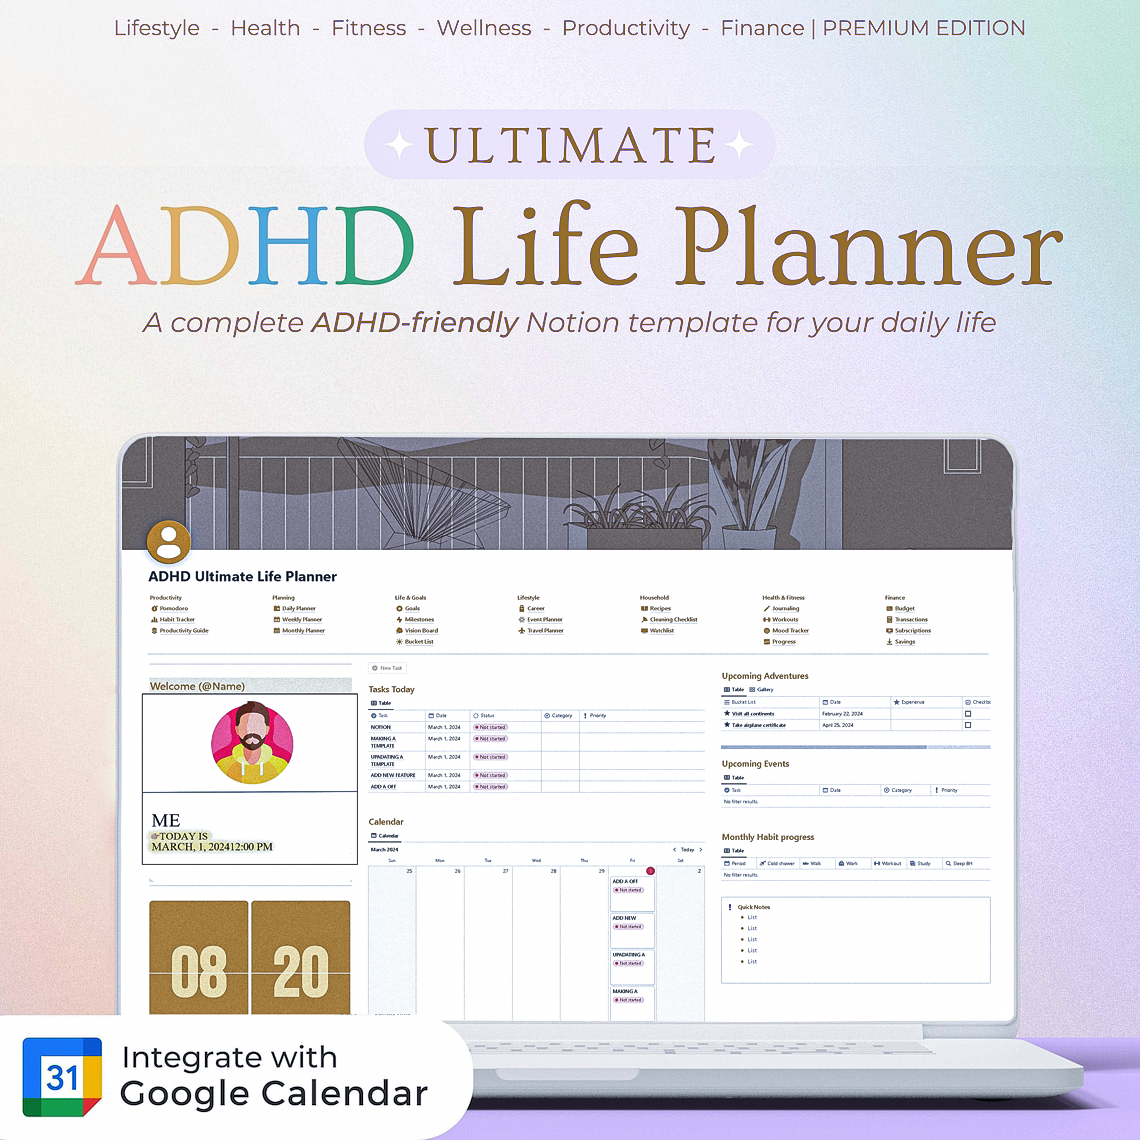 ADHD Notion Life Planner | ADHD friendly Notion Template (NEW DASHBOARD)